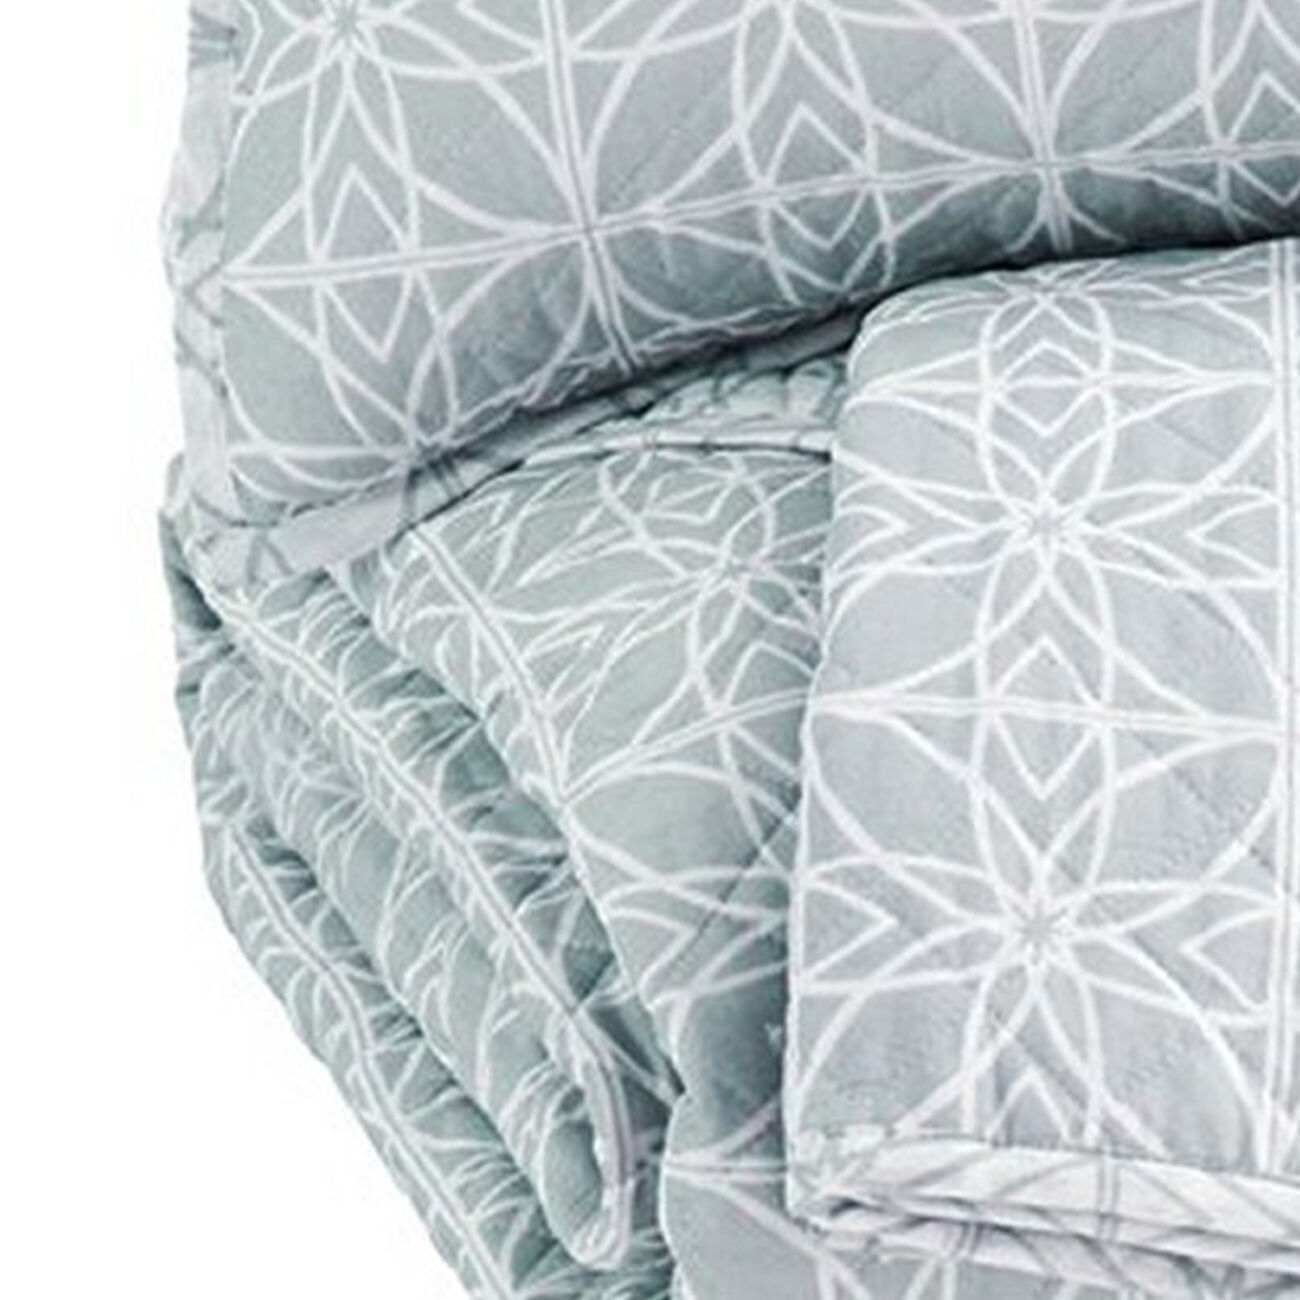 Fabric King Size Quilt Set with Geometric Design, Gray and White